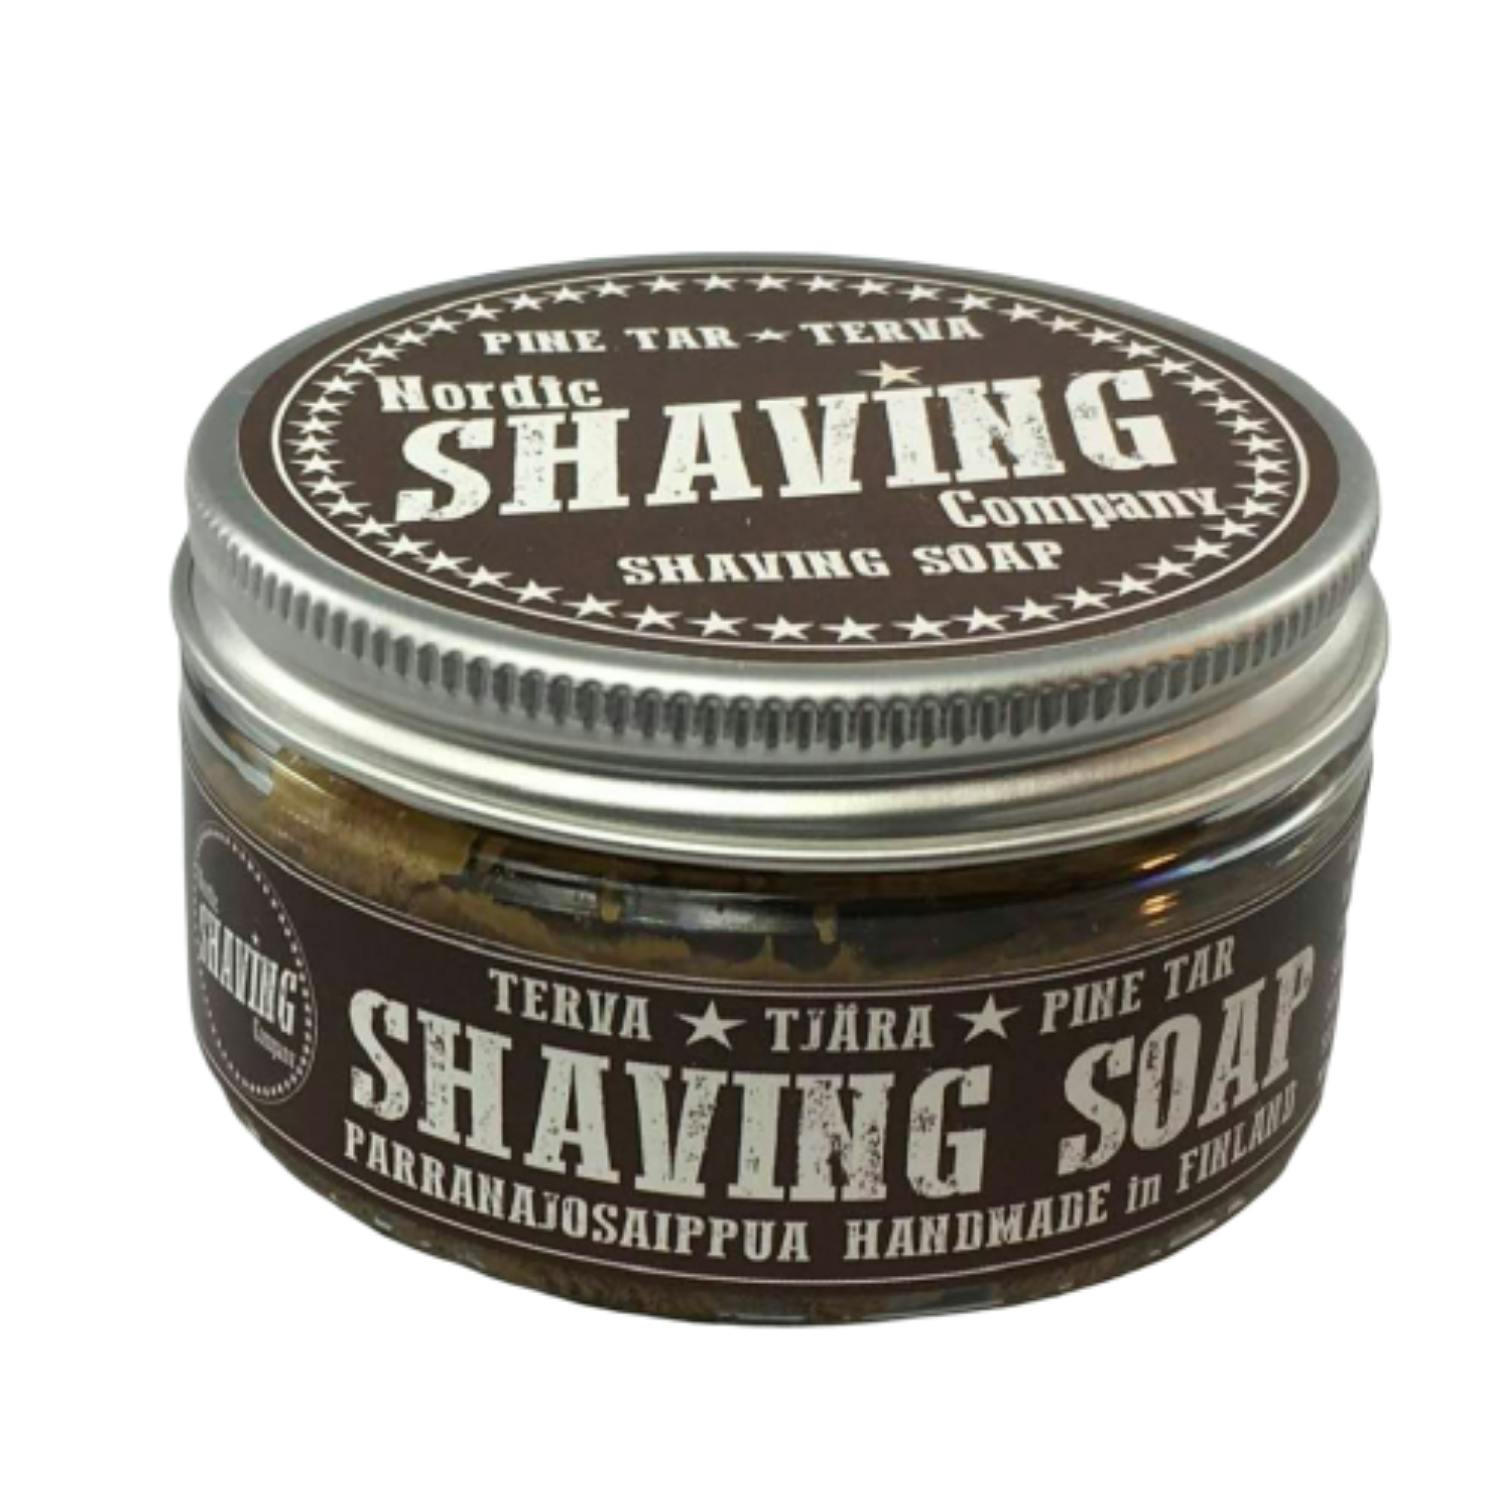 Stylish gift for men in this retro tin of natural shaving soap for wet shaving, with pine tar